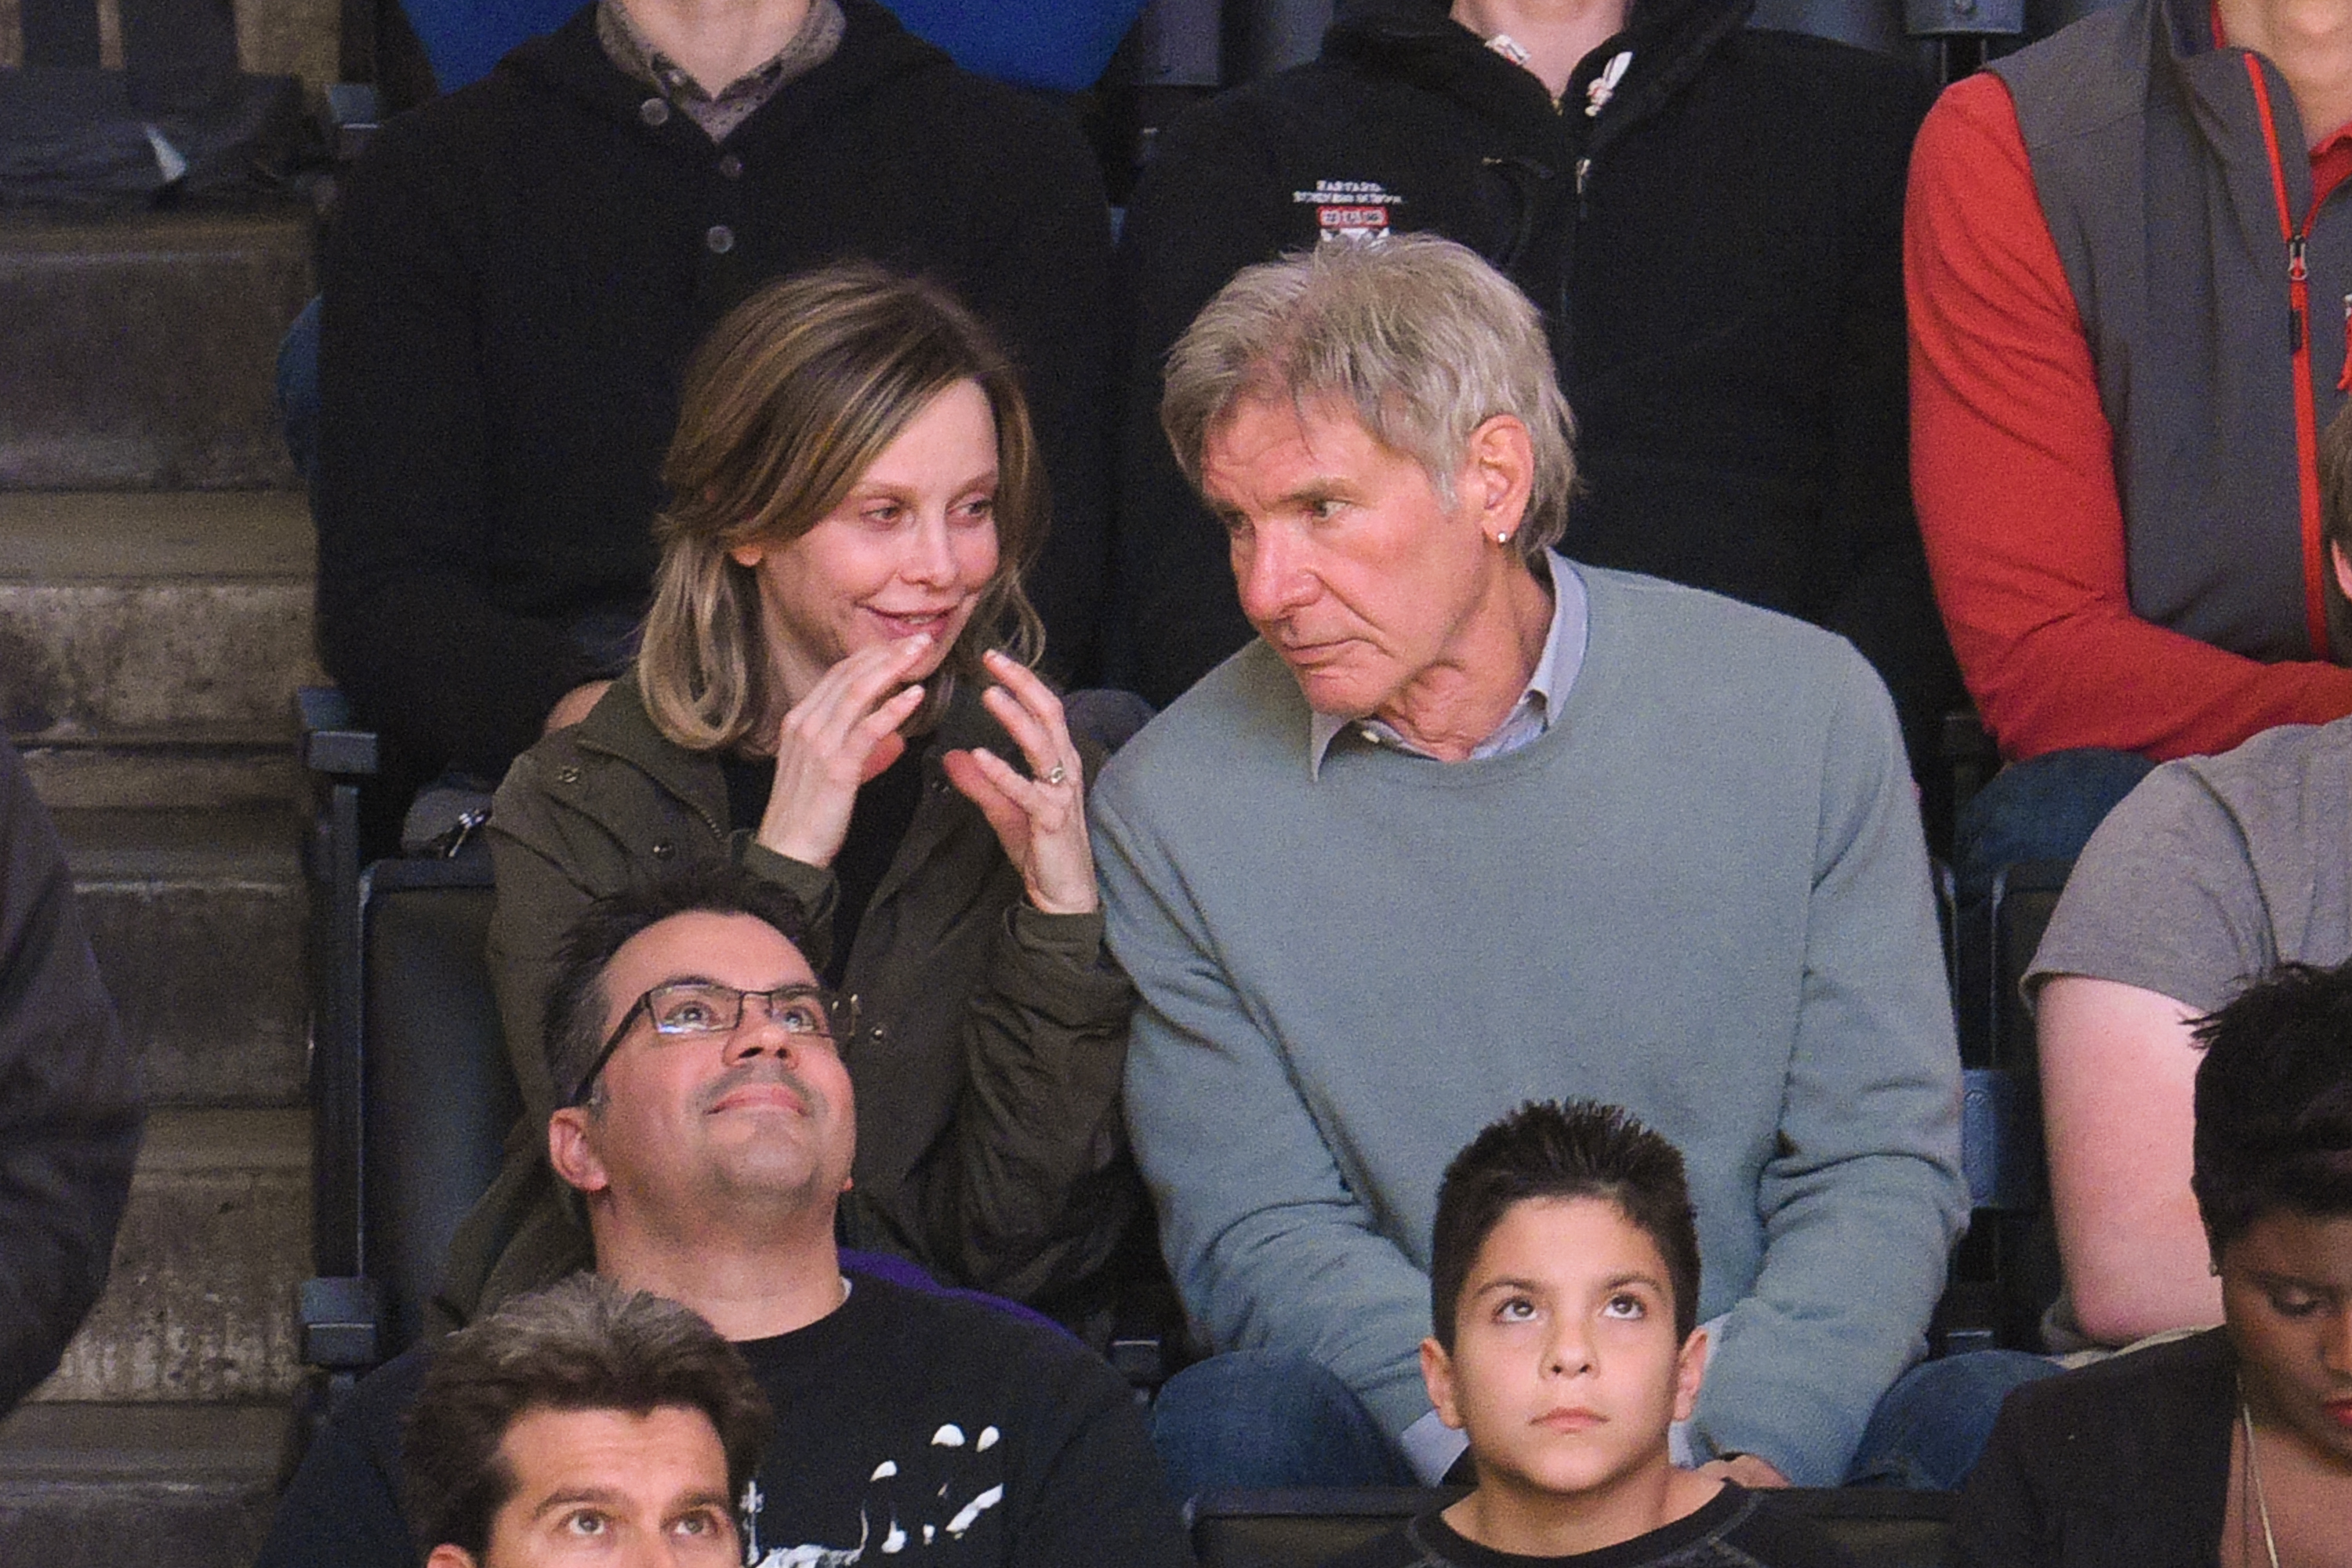  Calista Flockhart and Harrison Ford on January 31, 2016 in Los Angeles, California | Source: Getty Images